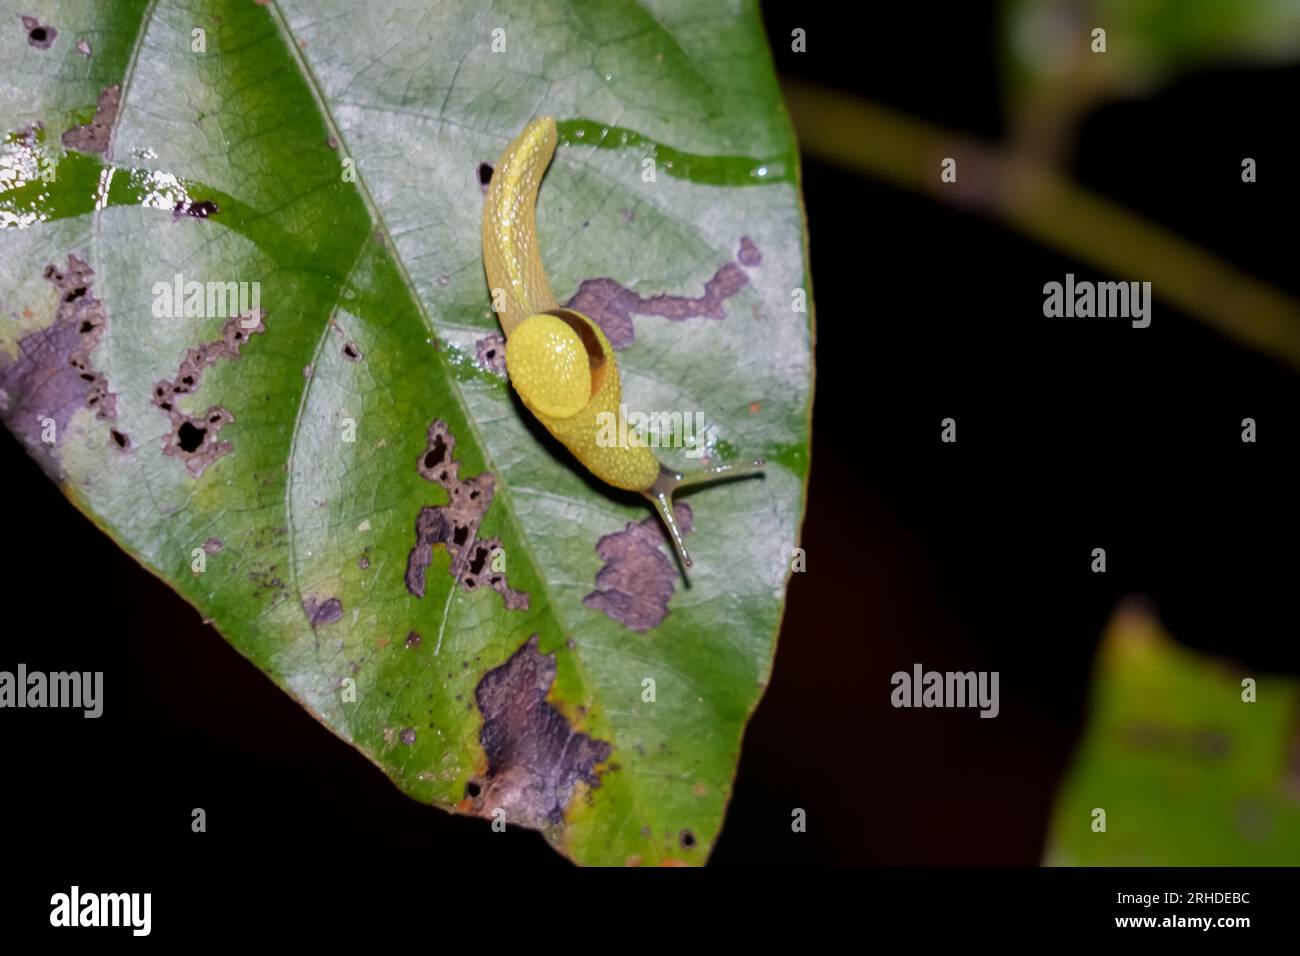 Long-tailed Semi-Slug (Ibycus rachelae) climbing on leaf. Yellow snail without shell in nature. Wildlife insect Stock Photo